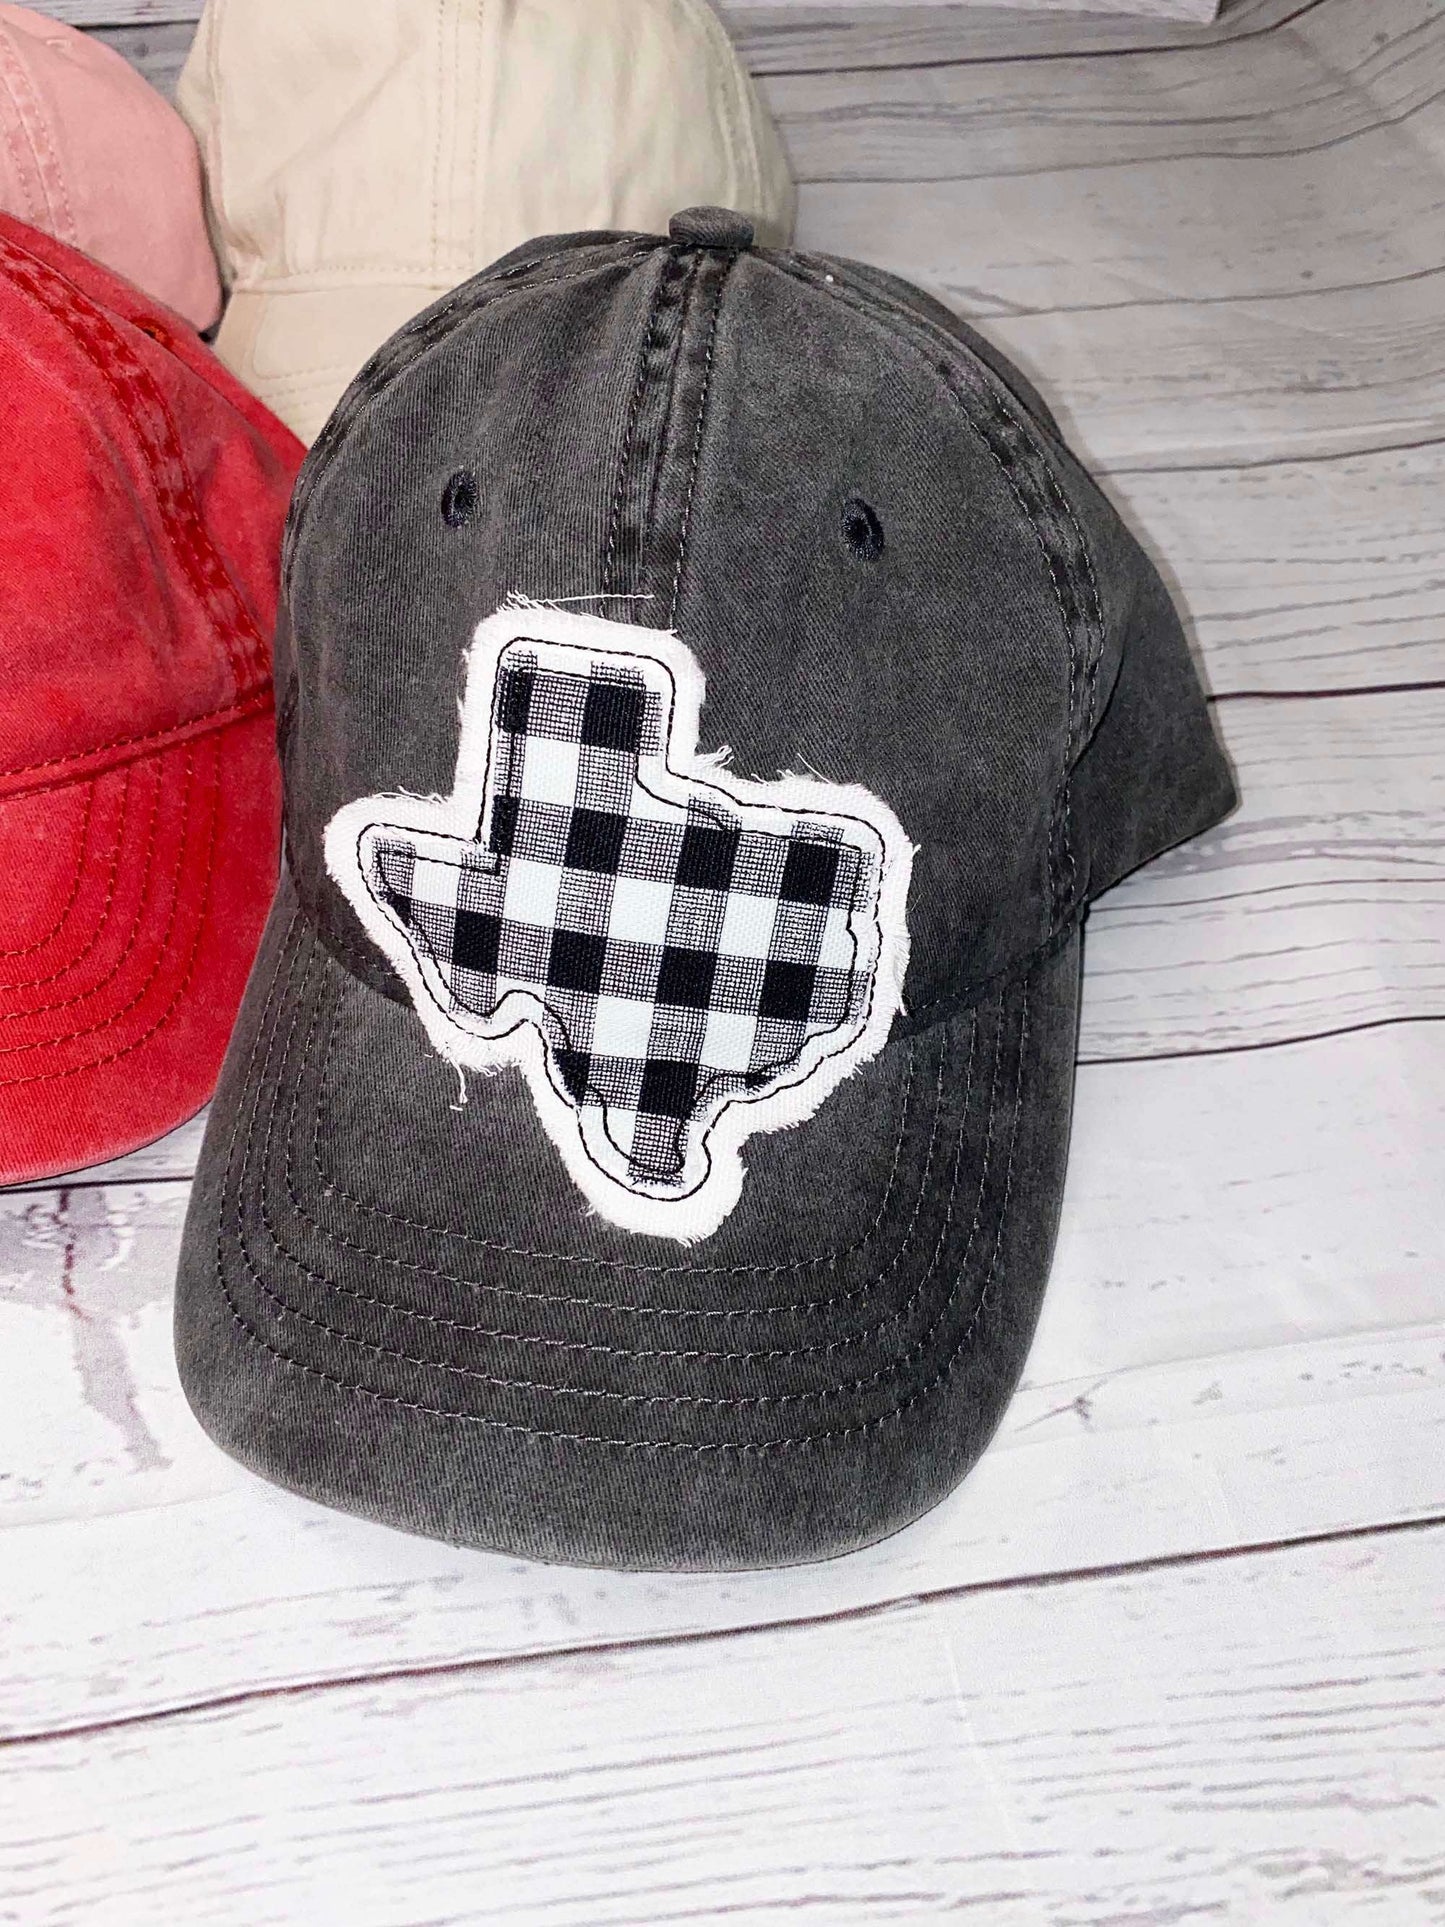 Texas Distressed Raggy Hat Patch